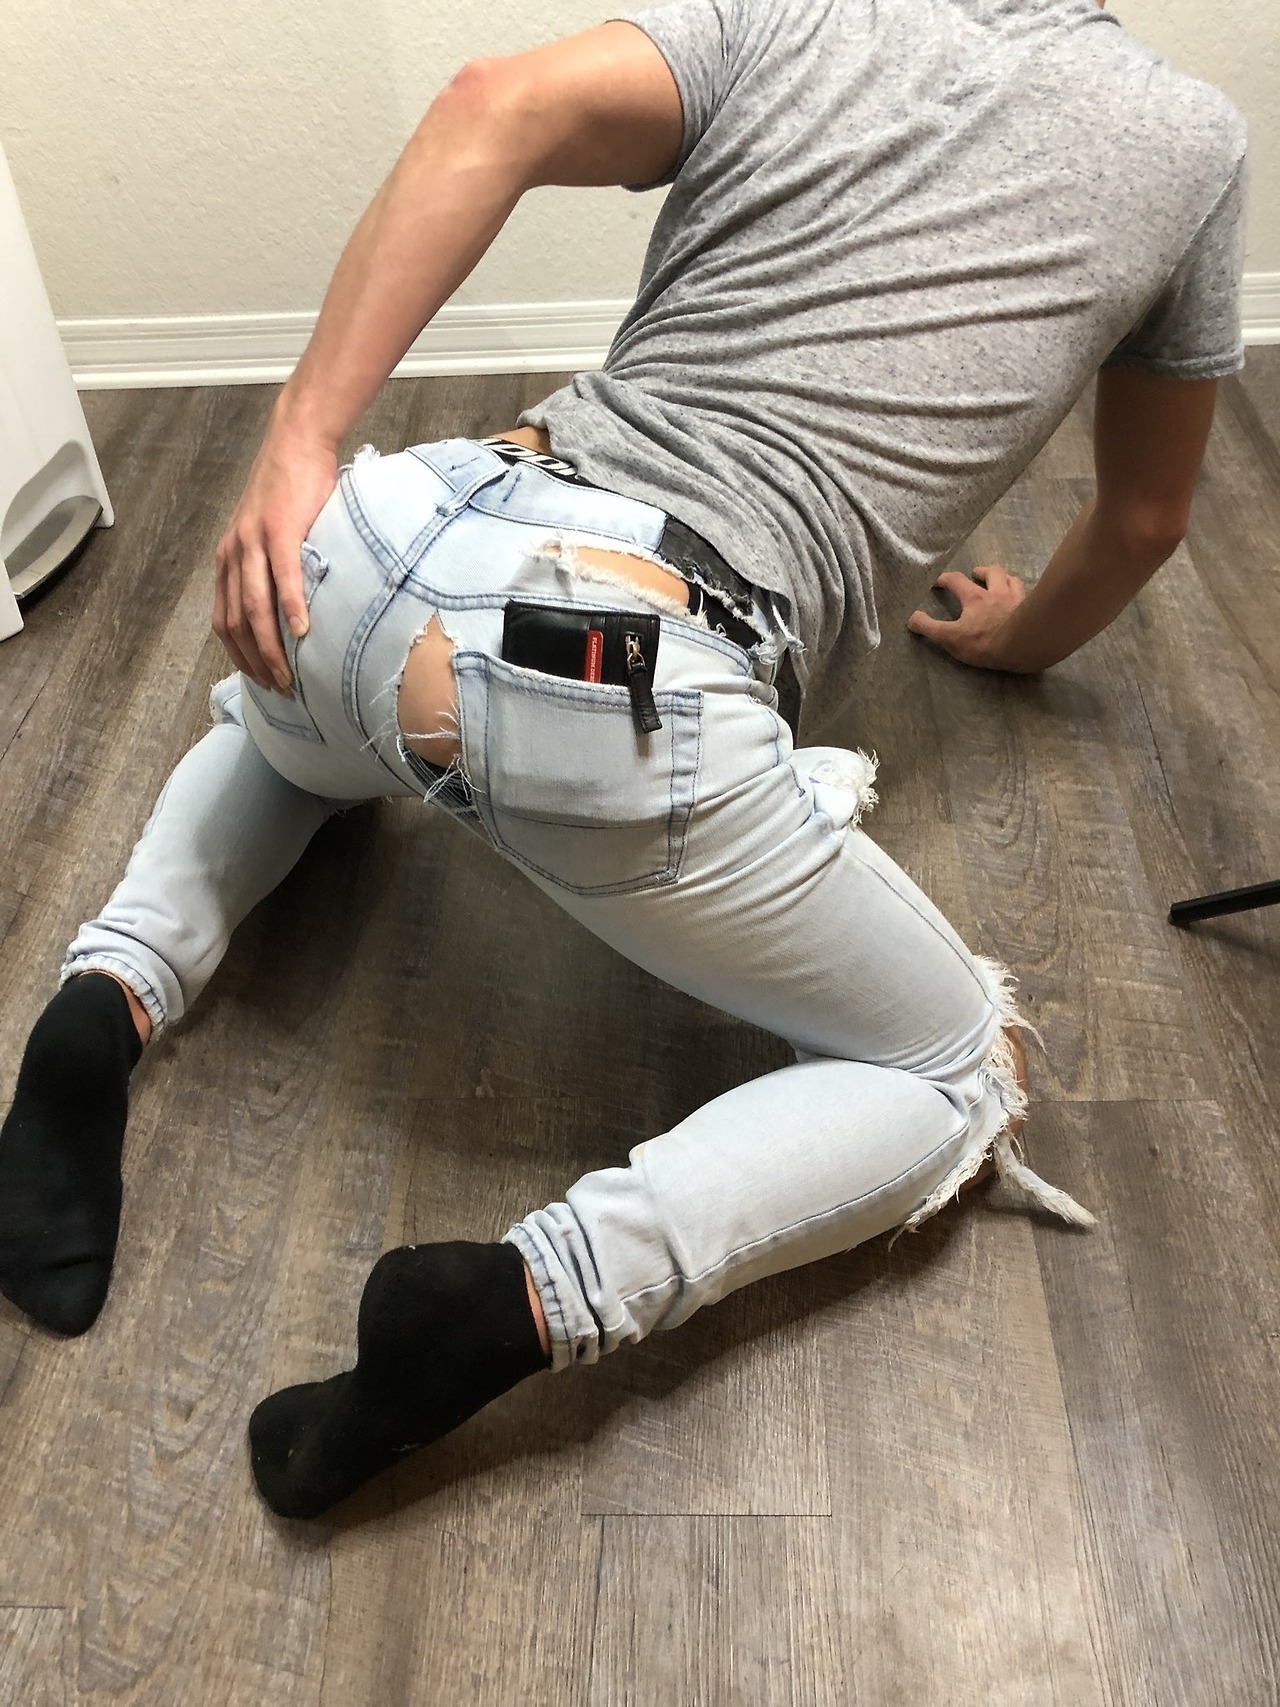 Guys dicks pop out their jeans